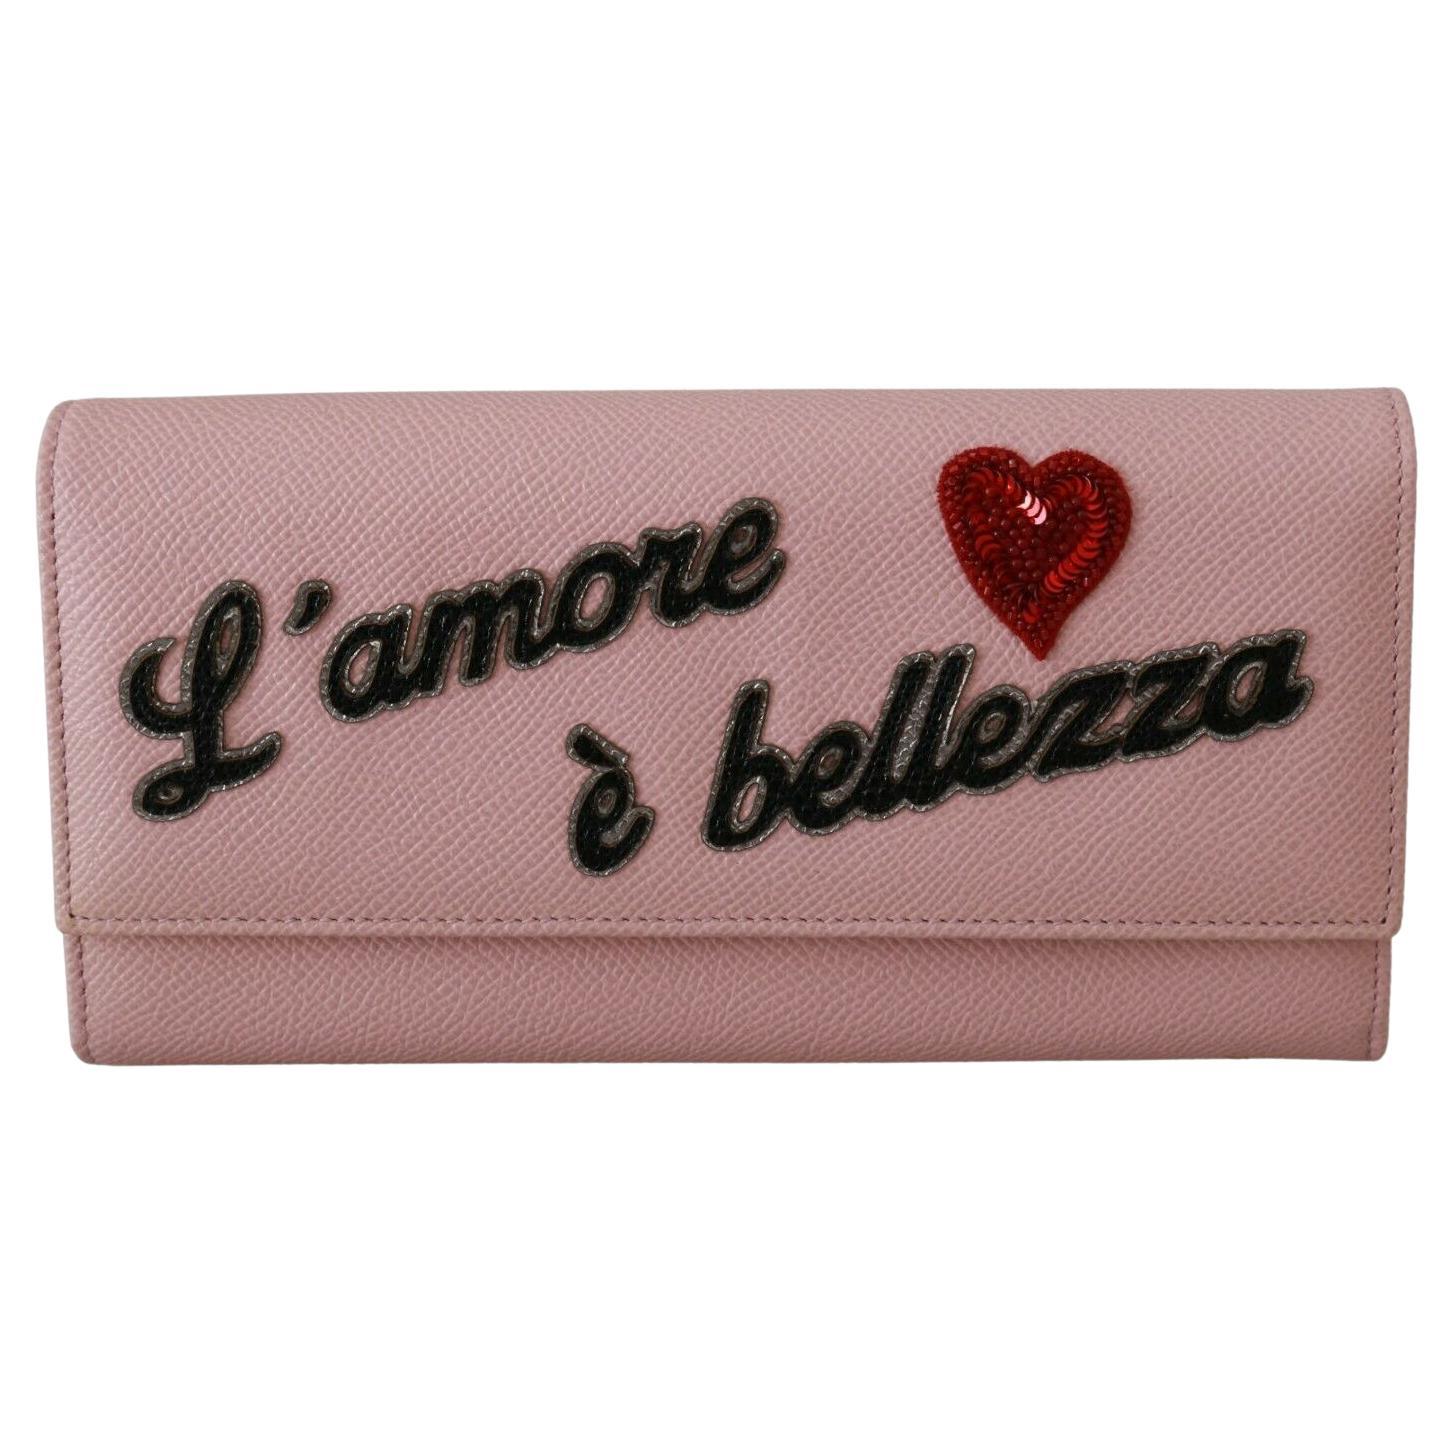 Dolce & Gabbana Pink Gold Leather L'amore Bellezza Continental Wallet Clutch DG